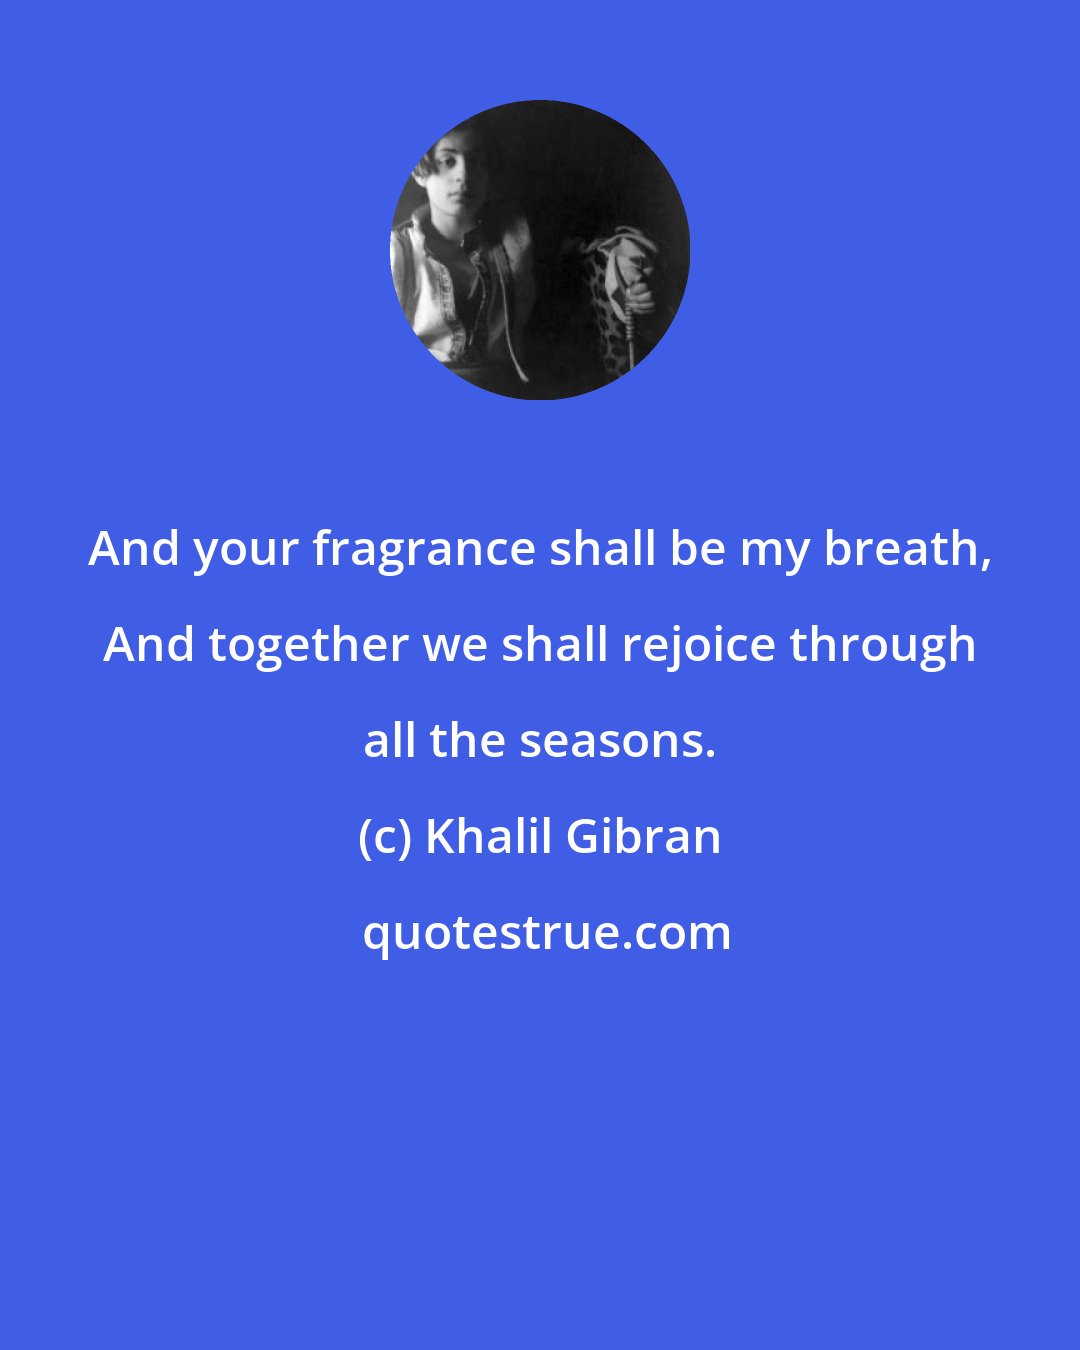 Khalil Gibran: And your fragrance shall be my breath, And together we shall rejoice through all the seasons.